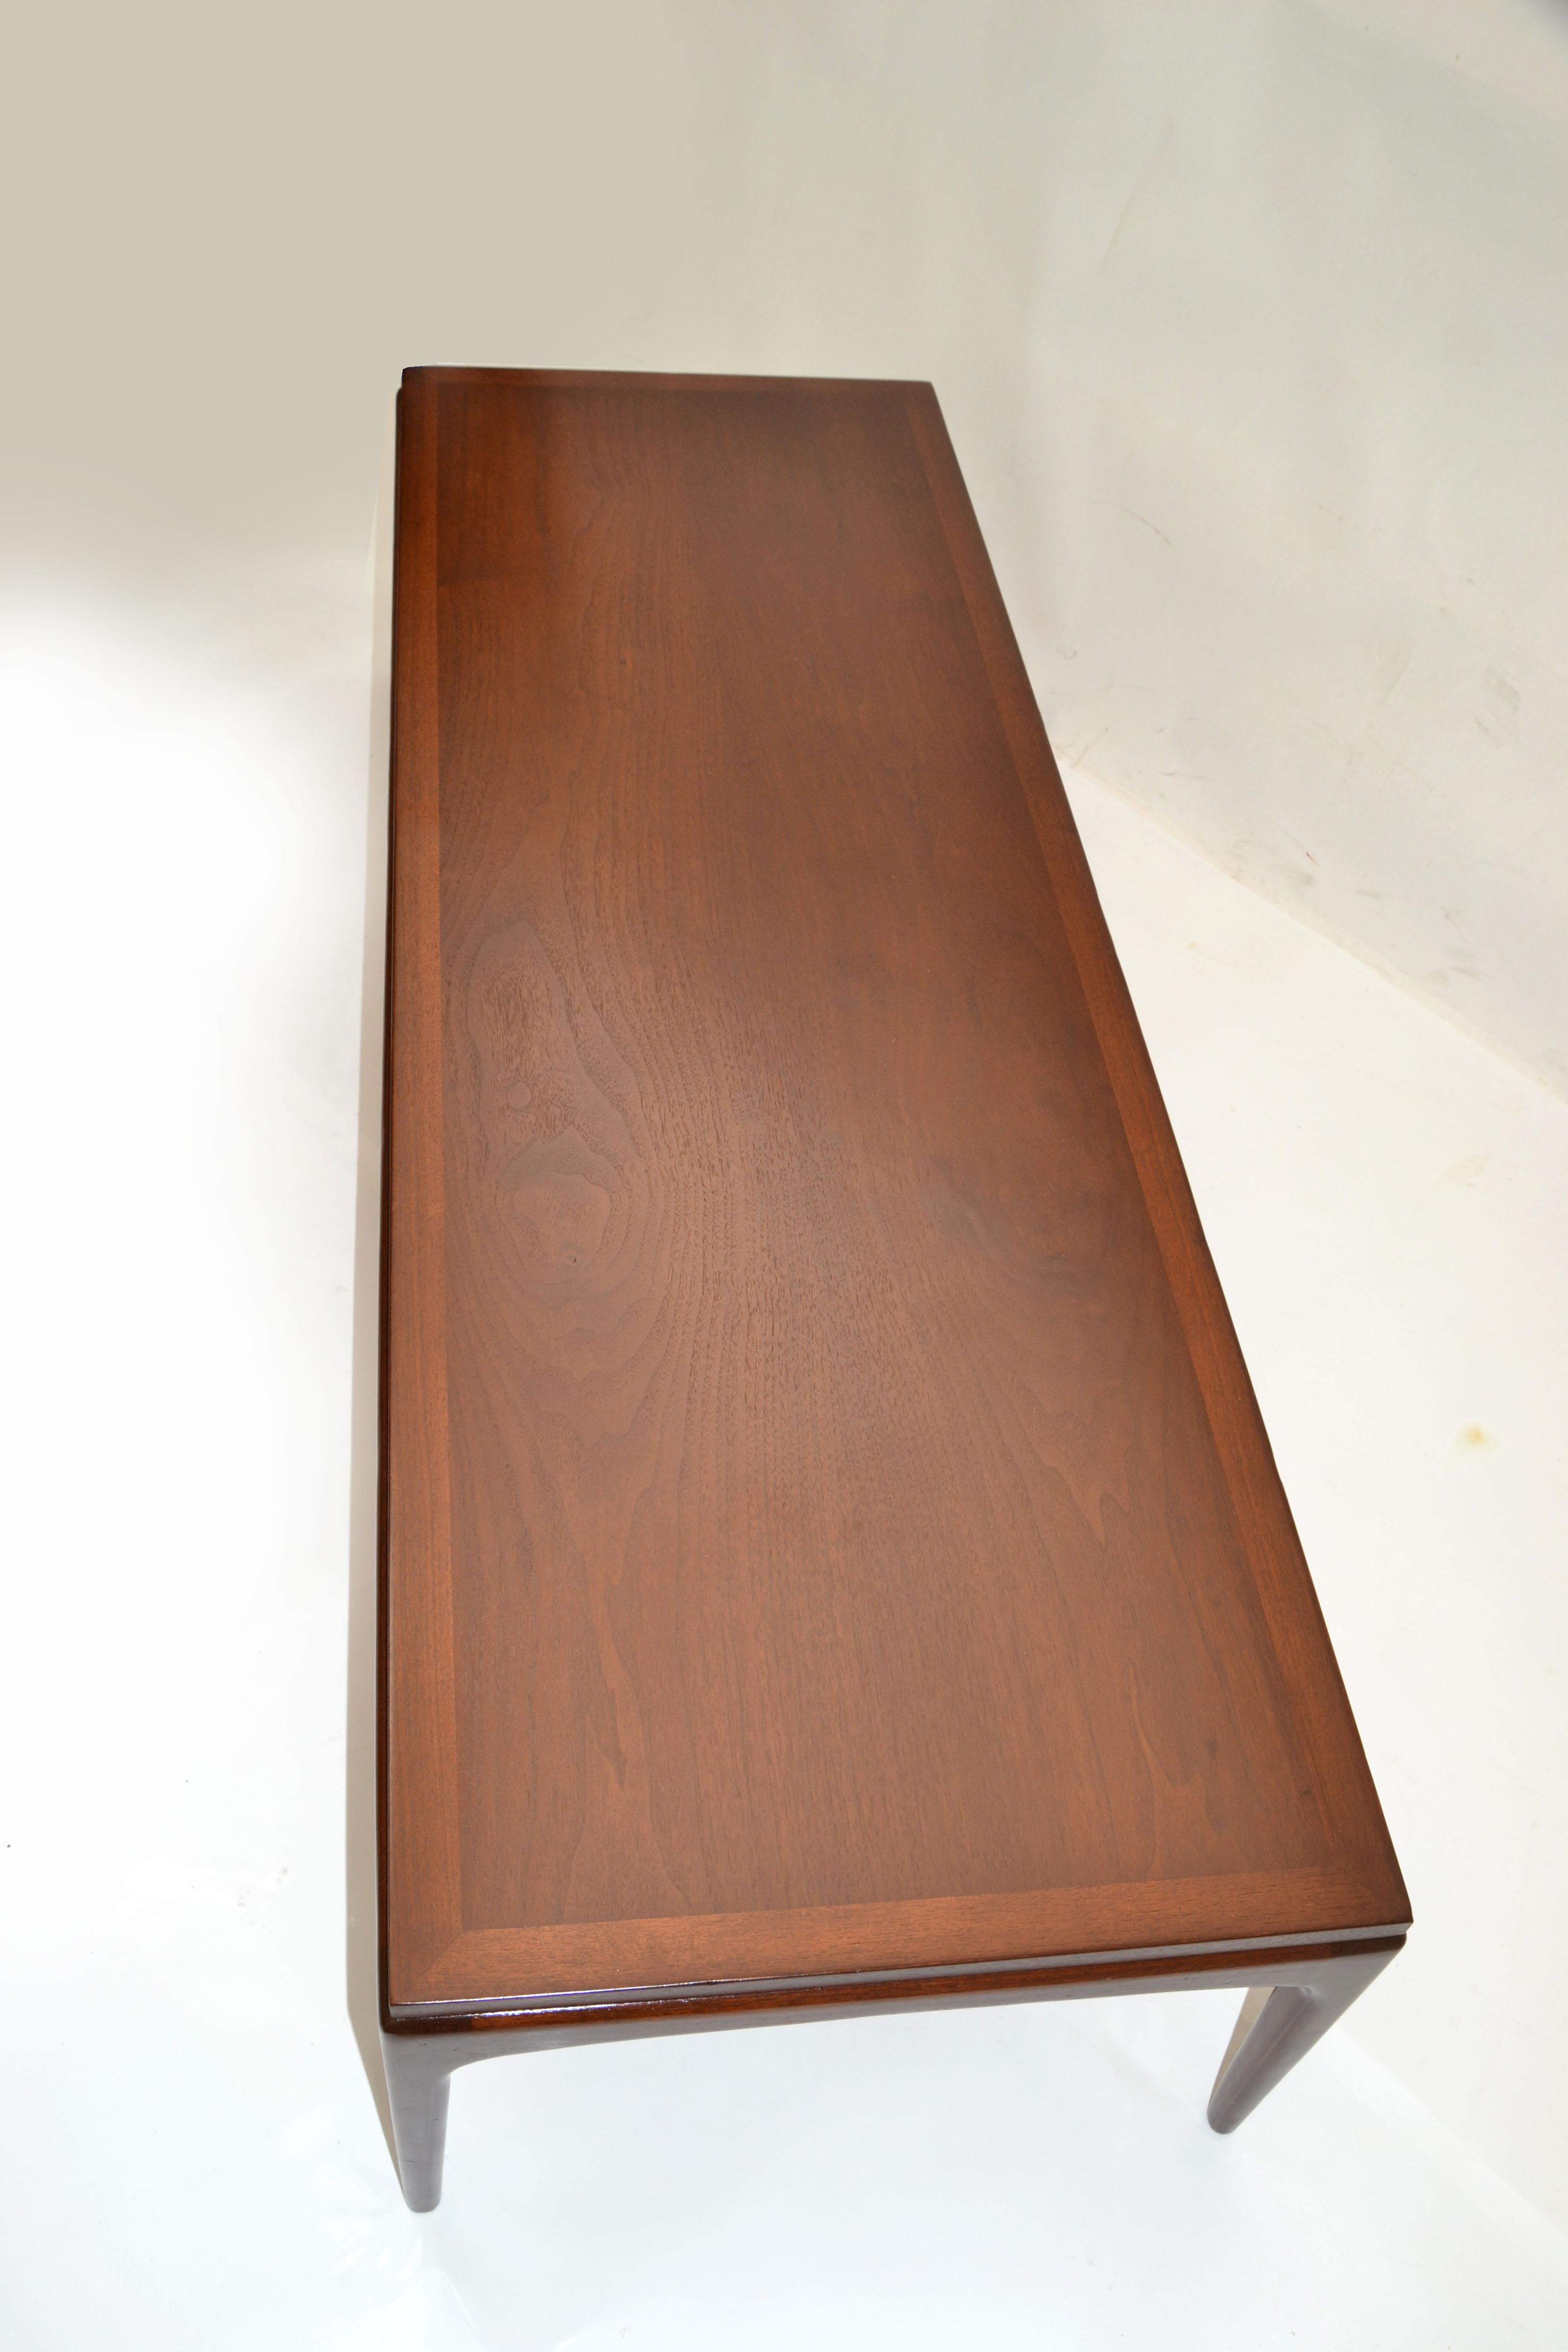 20th Century Gio Ponti Style Low Coffee Table Tapered Legs Walnut Mid-Century Modern Italy 70 For Sale